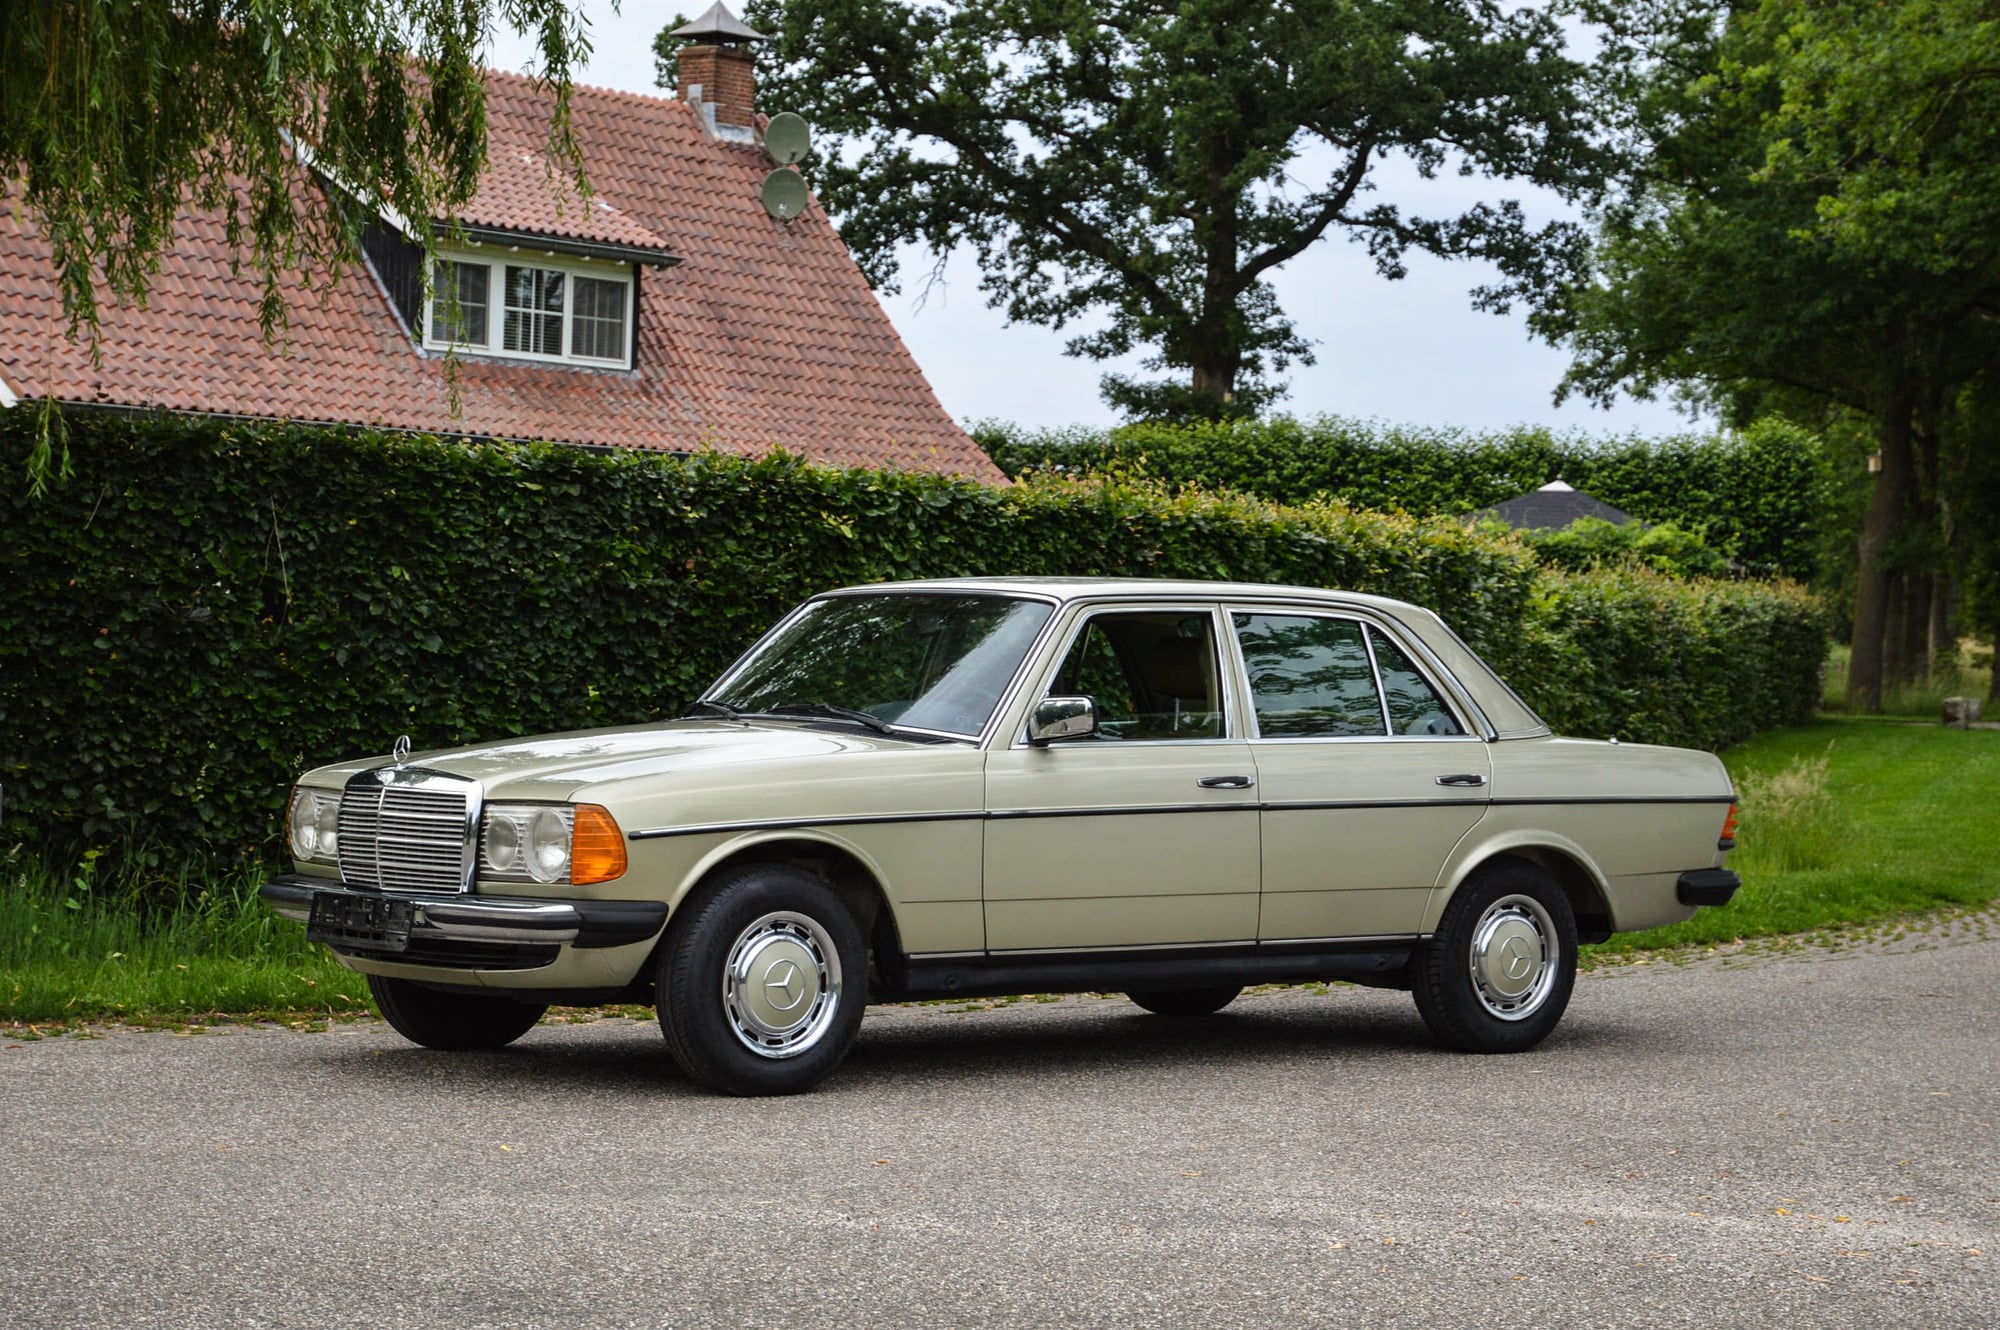 1982 Mercedes-Benz 300D - W123 1982 200 Carb - 50k Miles - Sunroof delete, 4-speed - Mint condition - Used - VIN WDB12322010094041 - 50,052 Miles - 4 cyl - 2WD - Manual - Sedan - Other - Oldenzaal, Netherlands